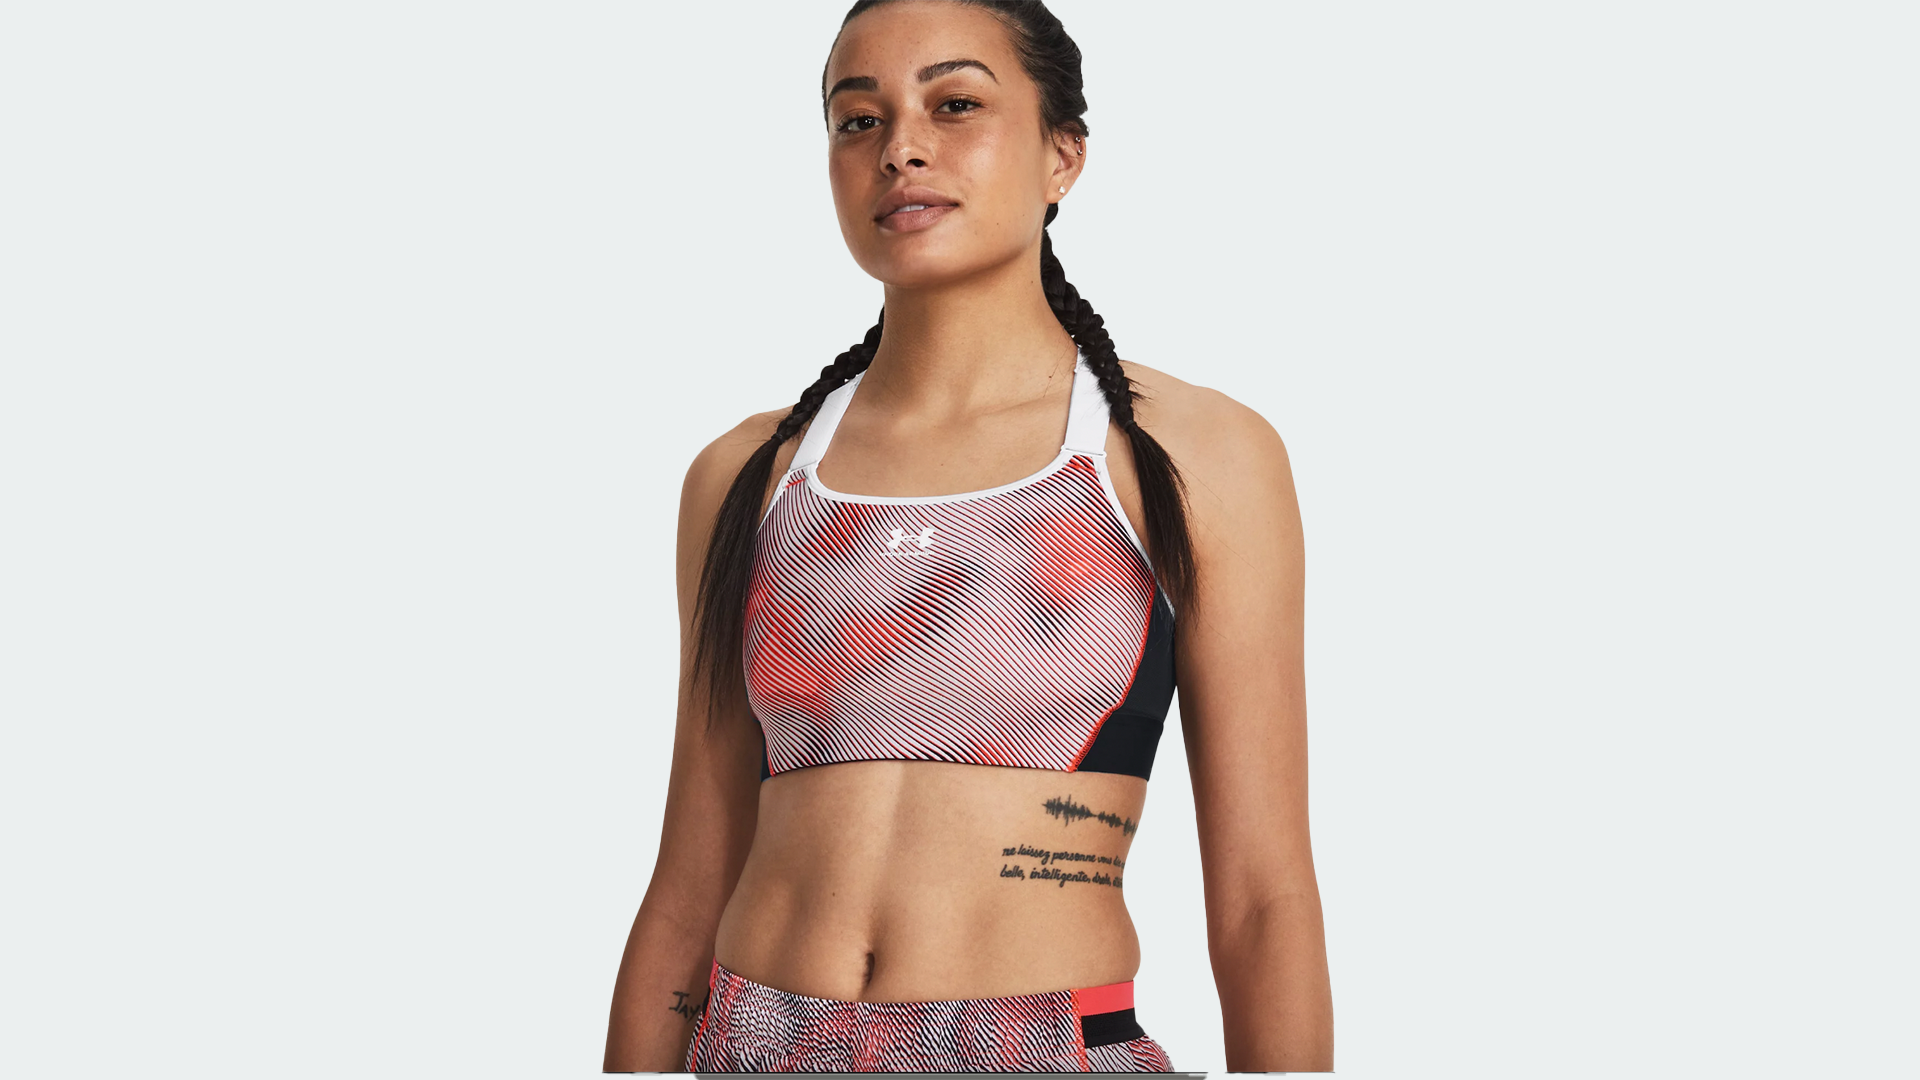 Under Armour to introduce new sports bra collection